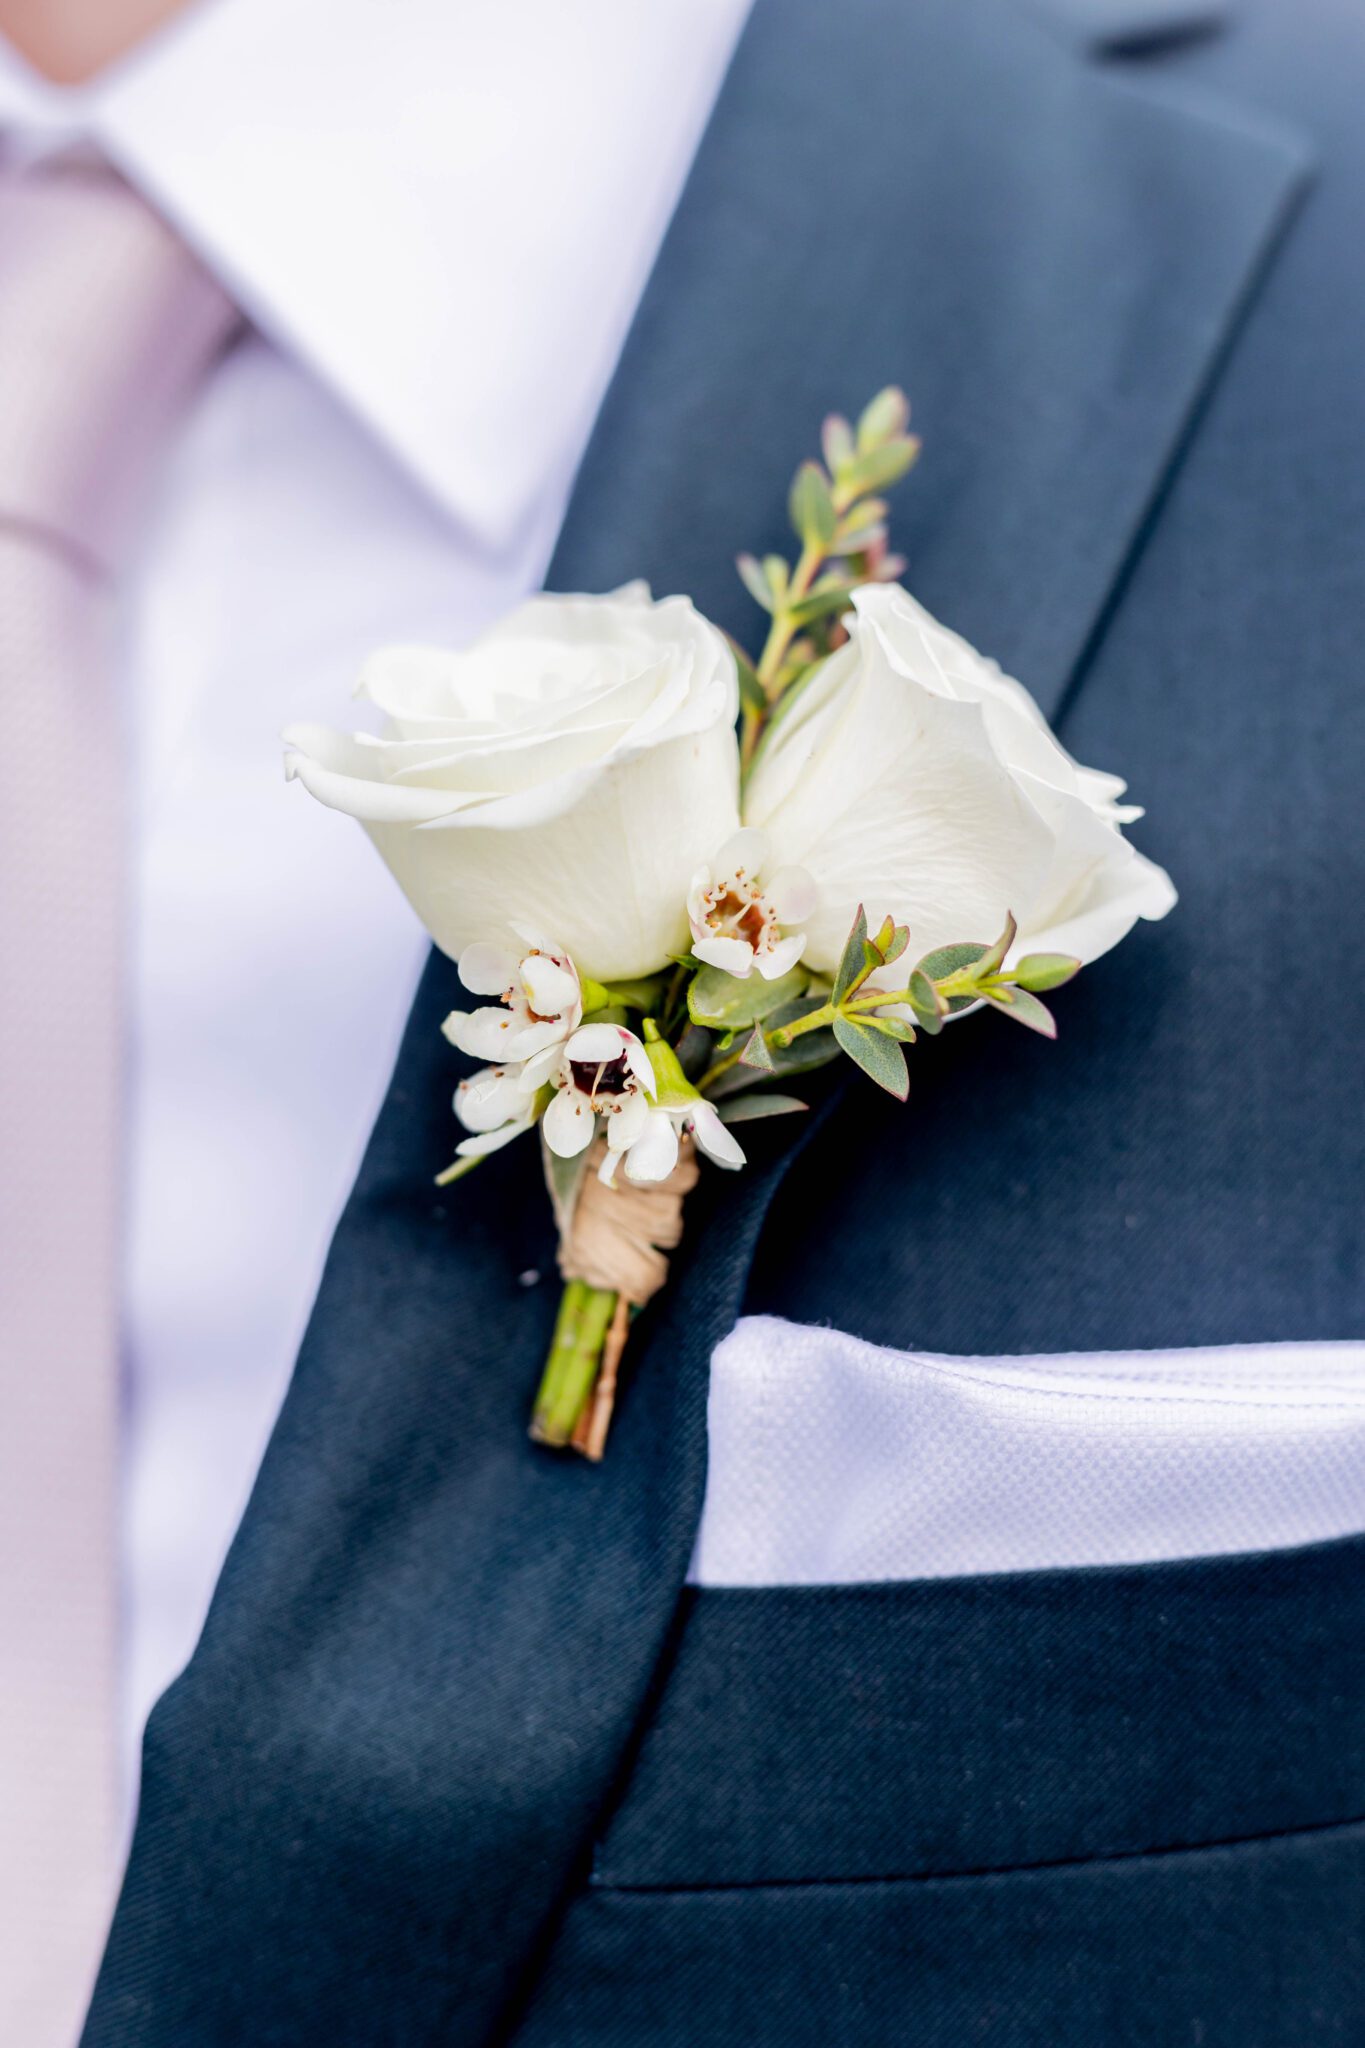 Close up portrait of groom's boutonnière complimented by navy blue suite and light pink tie. 